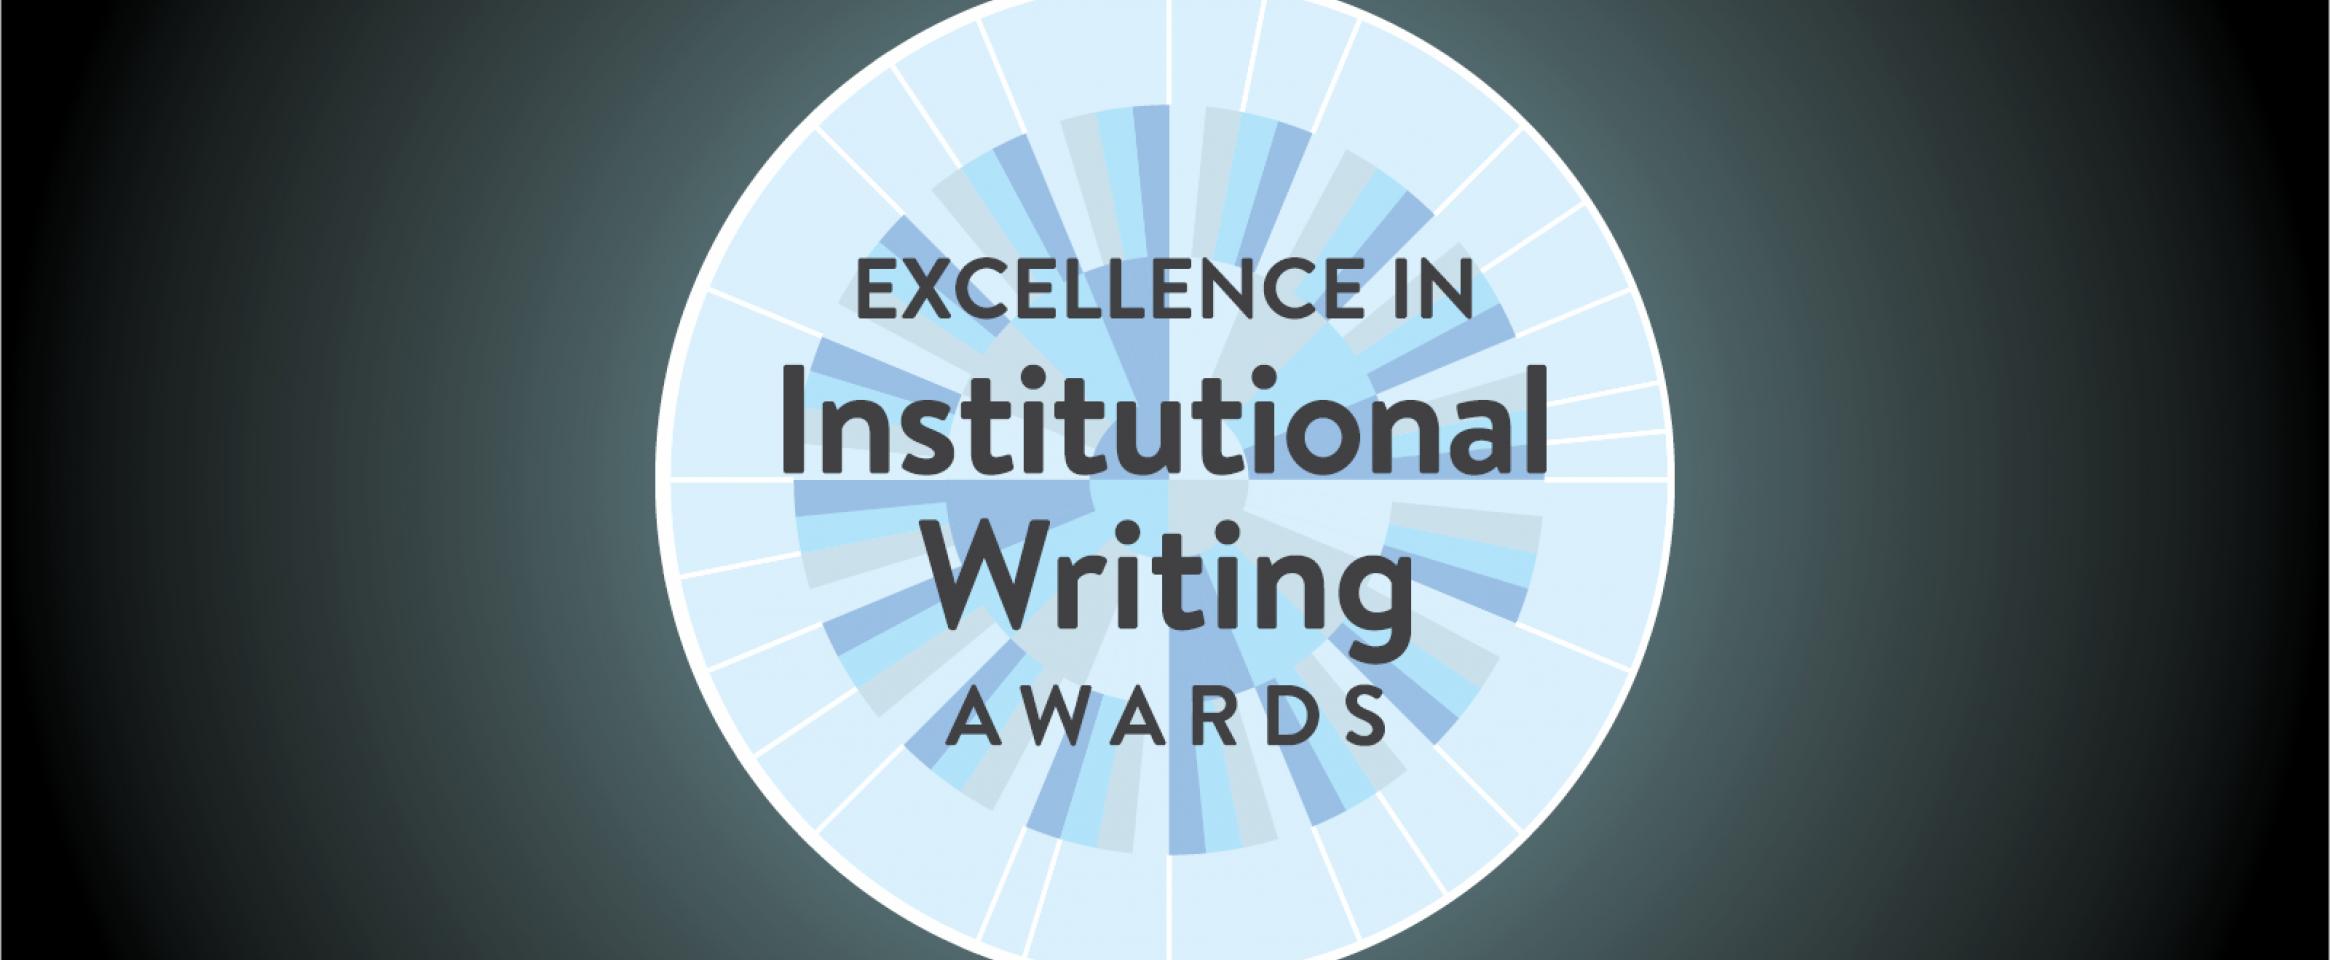 Logomark of the N A S W Excellence in Institutional Writing Awards, a round medallion motif nested within a radiant gradient backgroun.